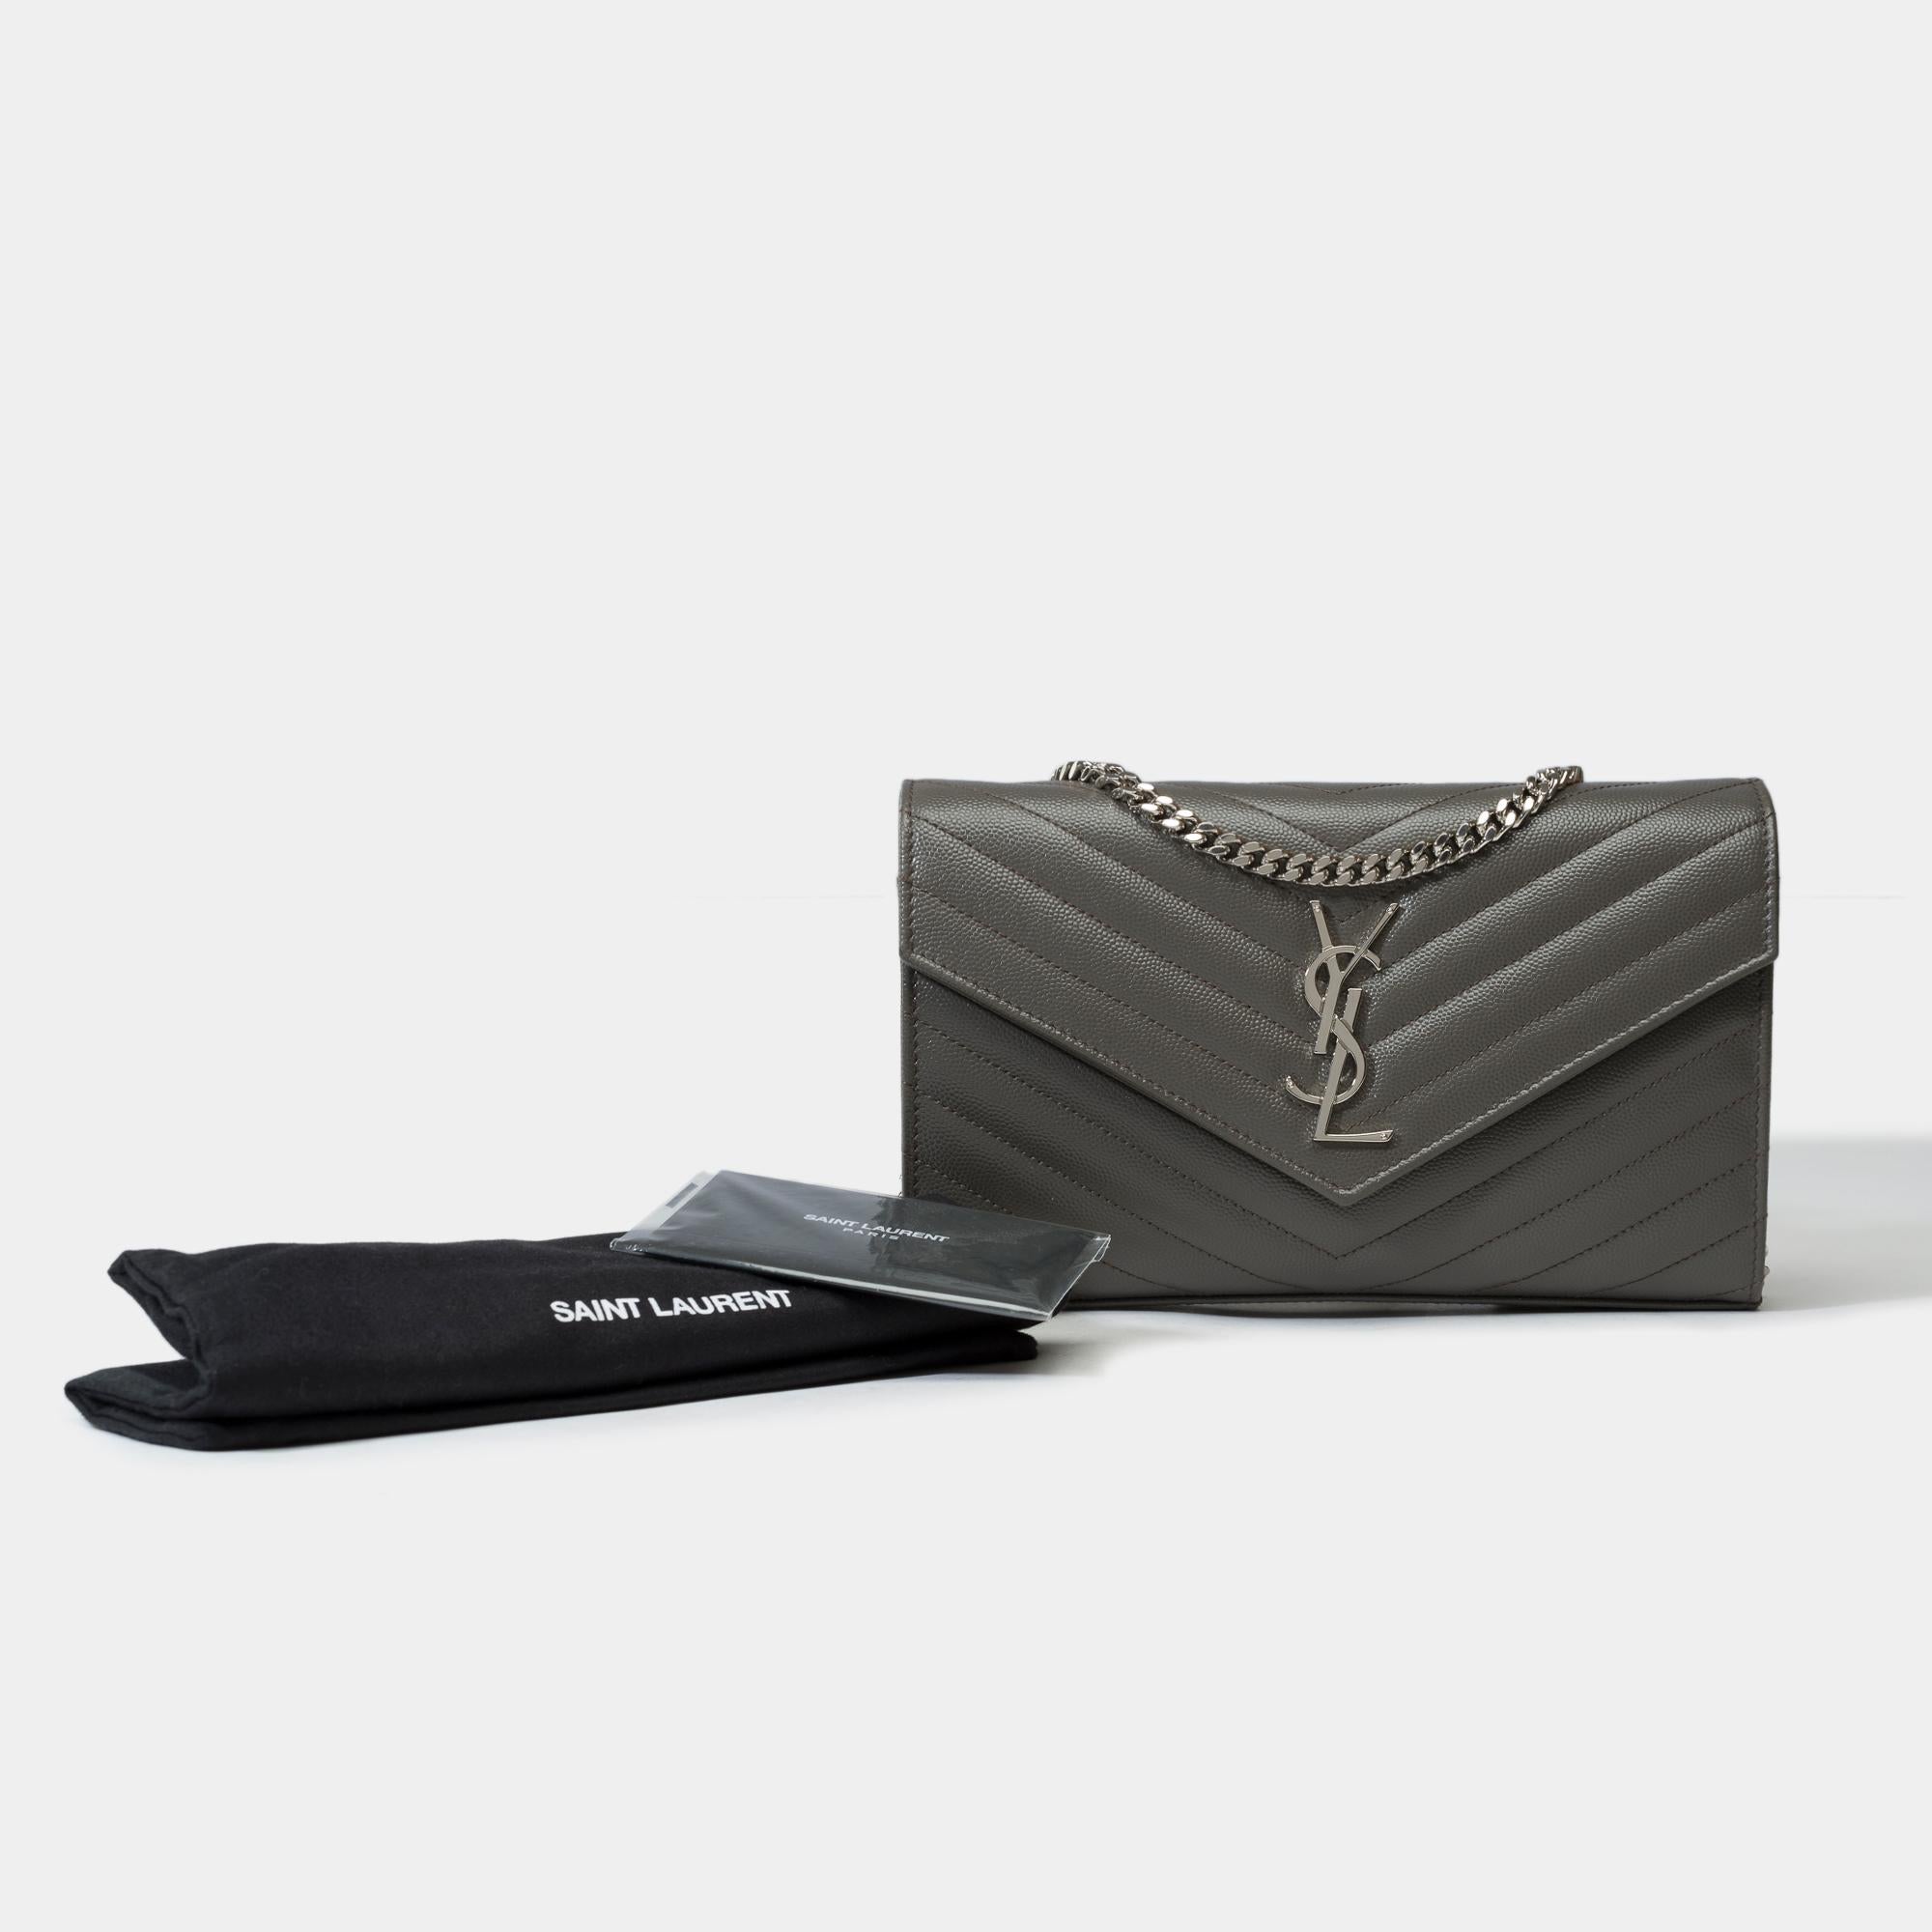 Gorgeous​ ​Timeless​ ​YSL​ ​Cassandre​ ​classic​ ​silver​ ​chain​ ​adorned​ ​with​ ​Cassandre​ ​and​ ​stitched​ ​with​ ​the​ ​iconic​ ​quilted​ ​gray​ ​grained​ ​calf​ ​leather
Compact​ ​and​ ​functional,​ ​it​ ​has​ ​a​ ​zipped​ ​compartment​ ​and​